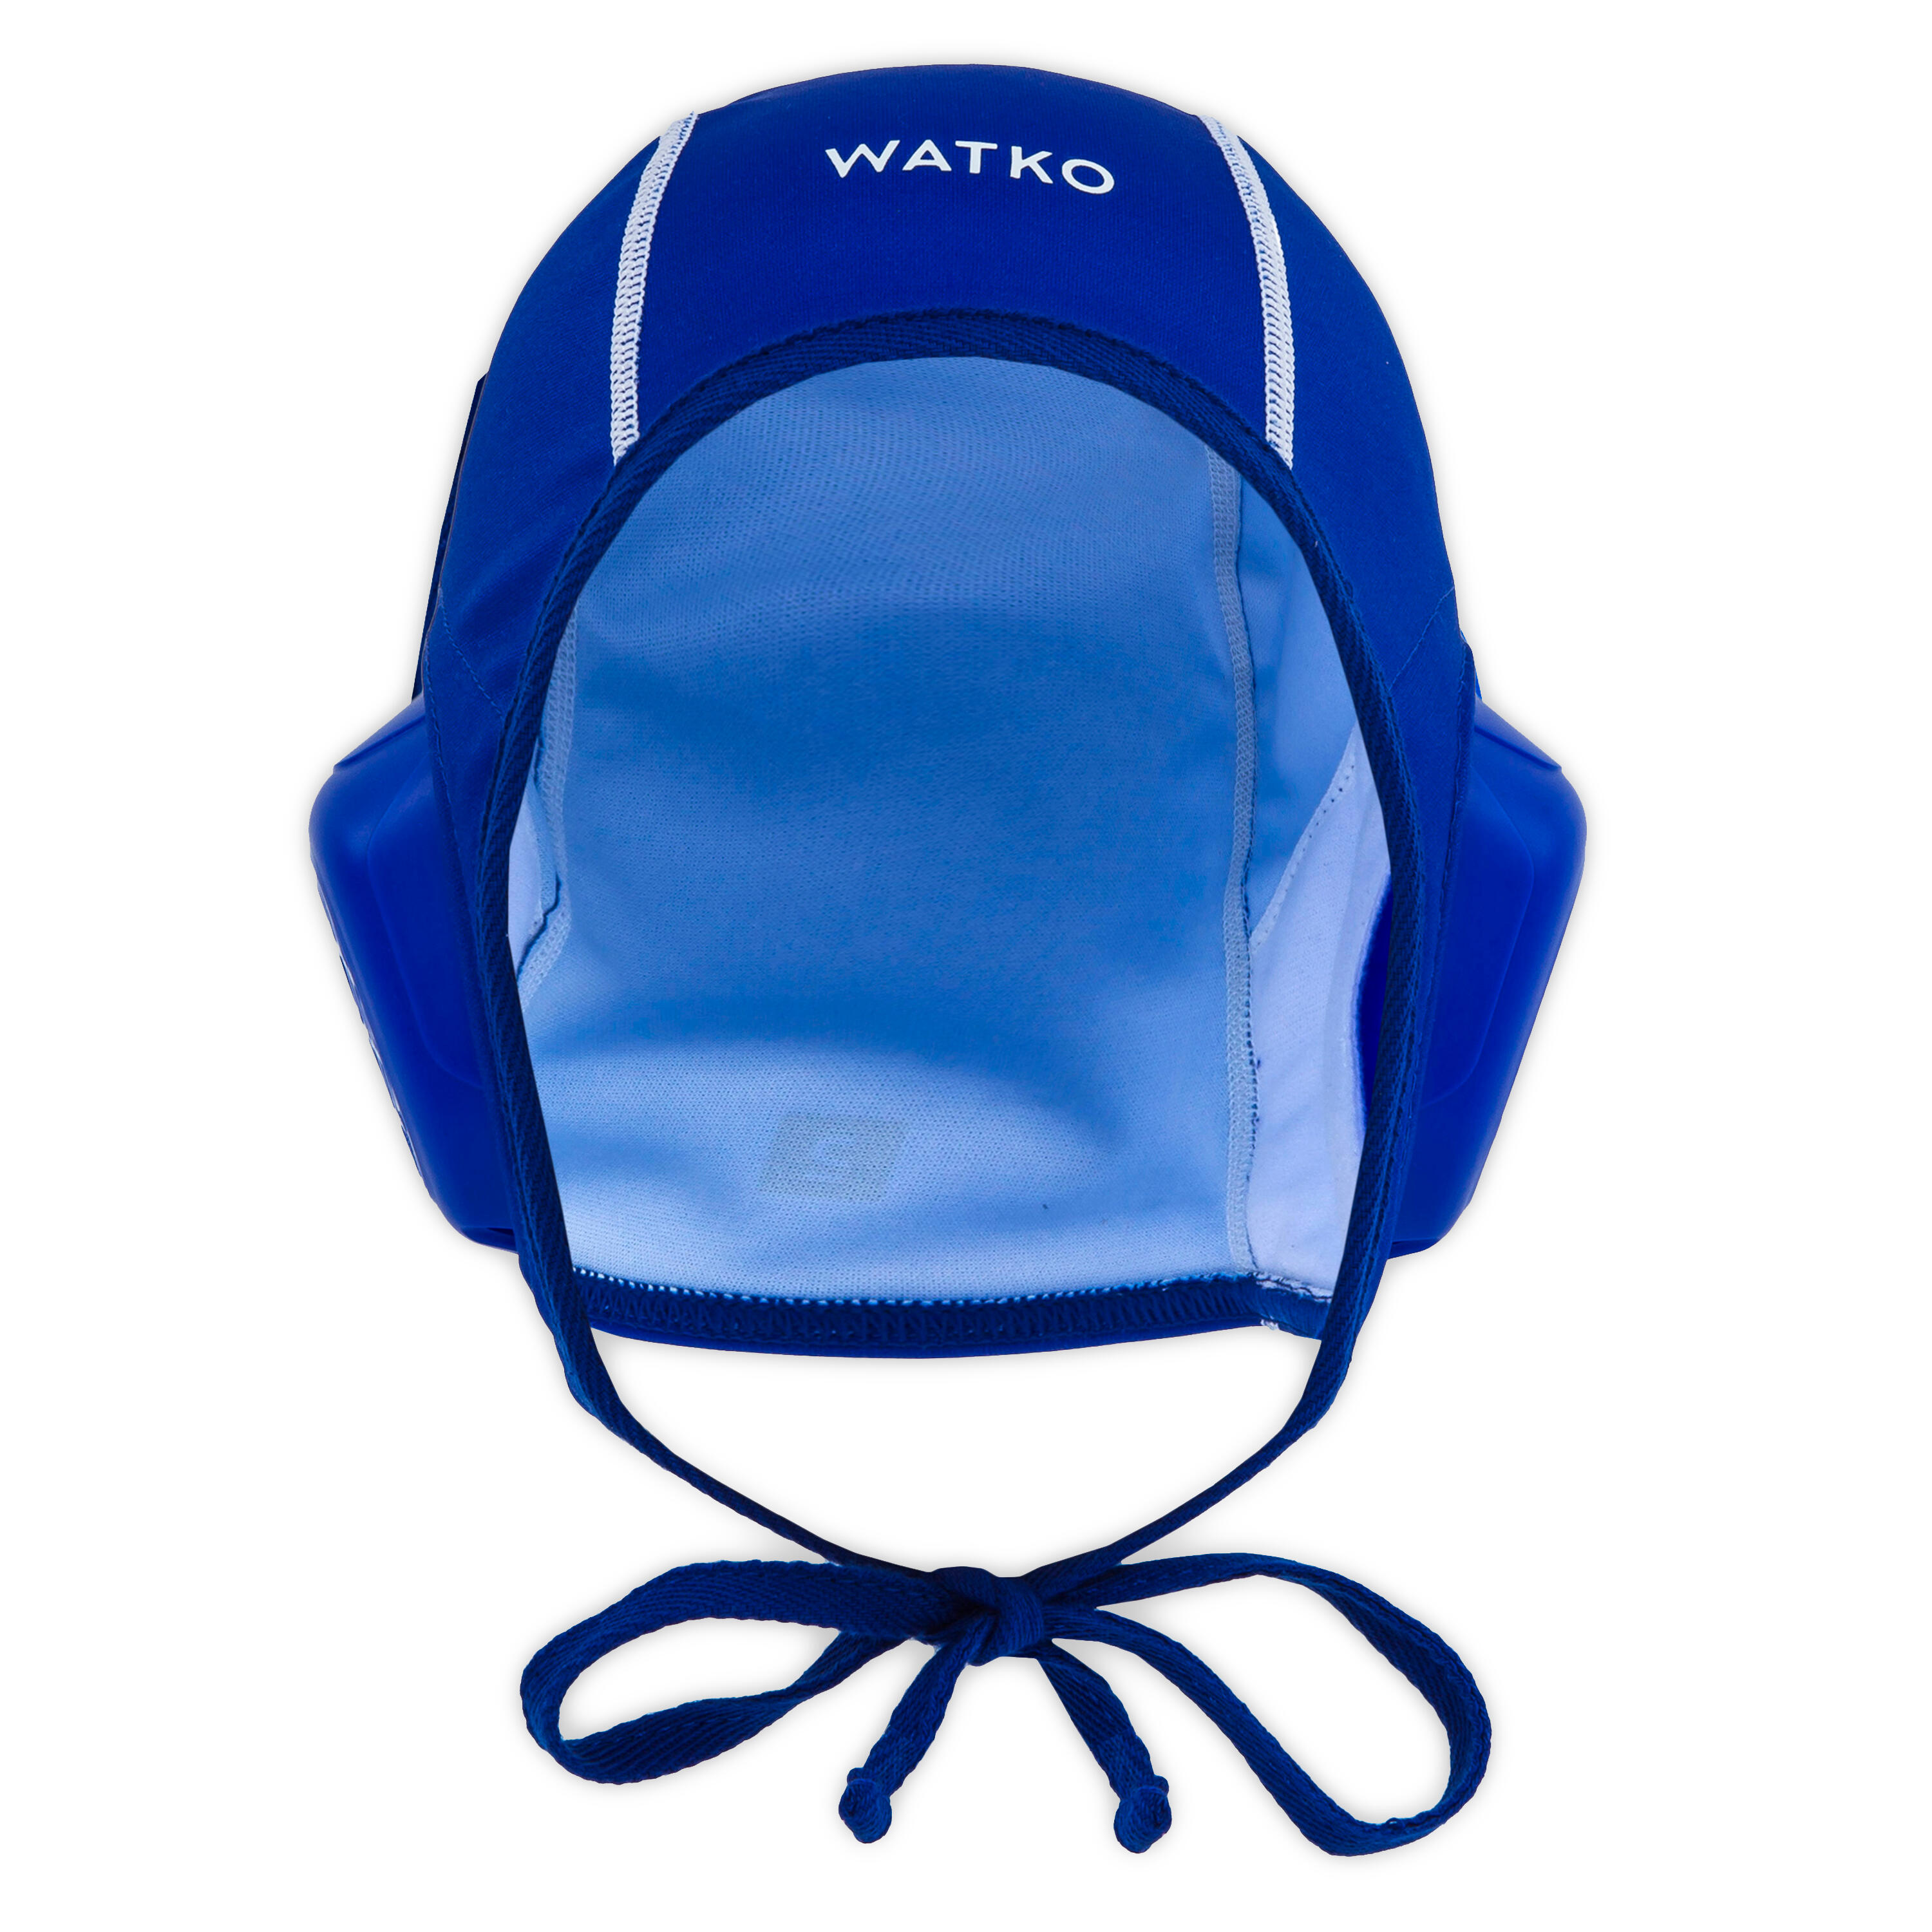 ADULT’S WATER POLO CAPS 900 SET OF 13 - BLUE 4/7